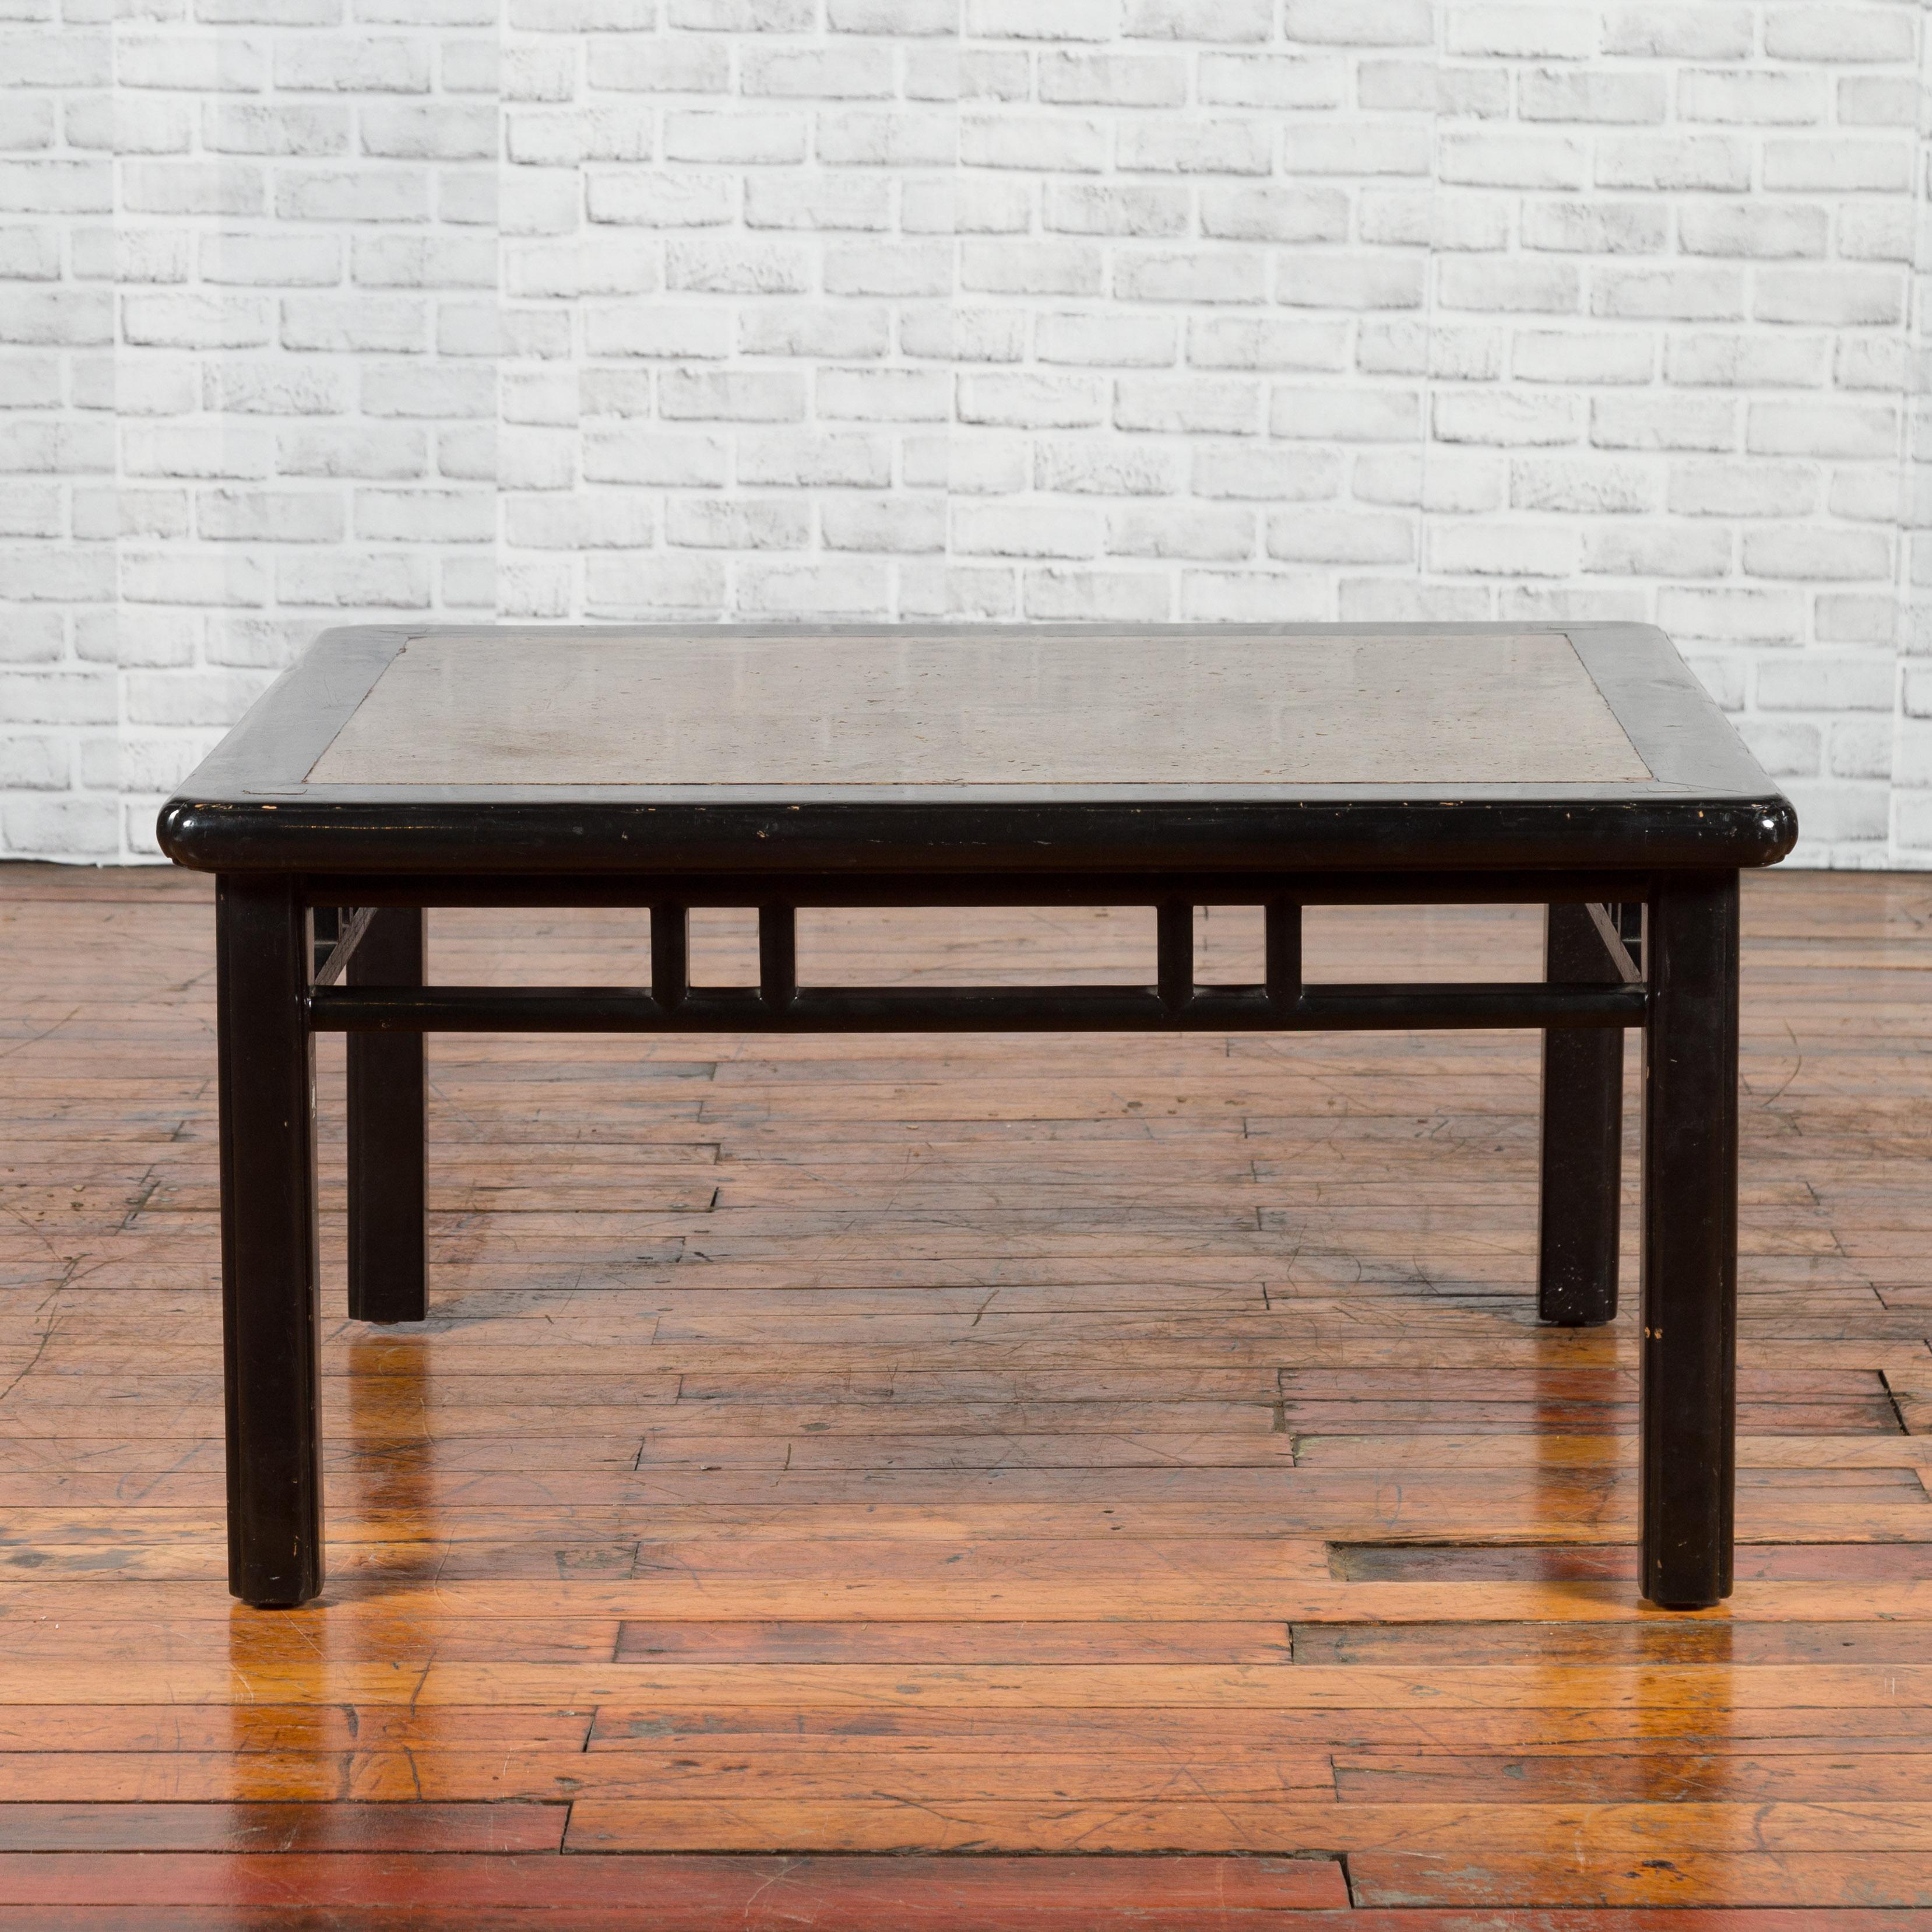 A Chinese black lacquered coffee table from the early 20th century, with stone top. Created in China during the early years of the 20th century, this black lacquered coffee table features a square variegated stone inset top sitting above an open